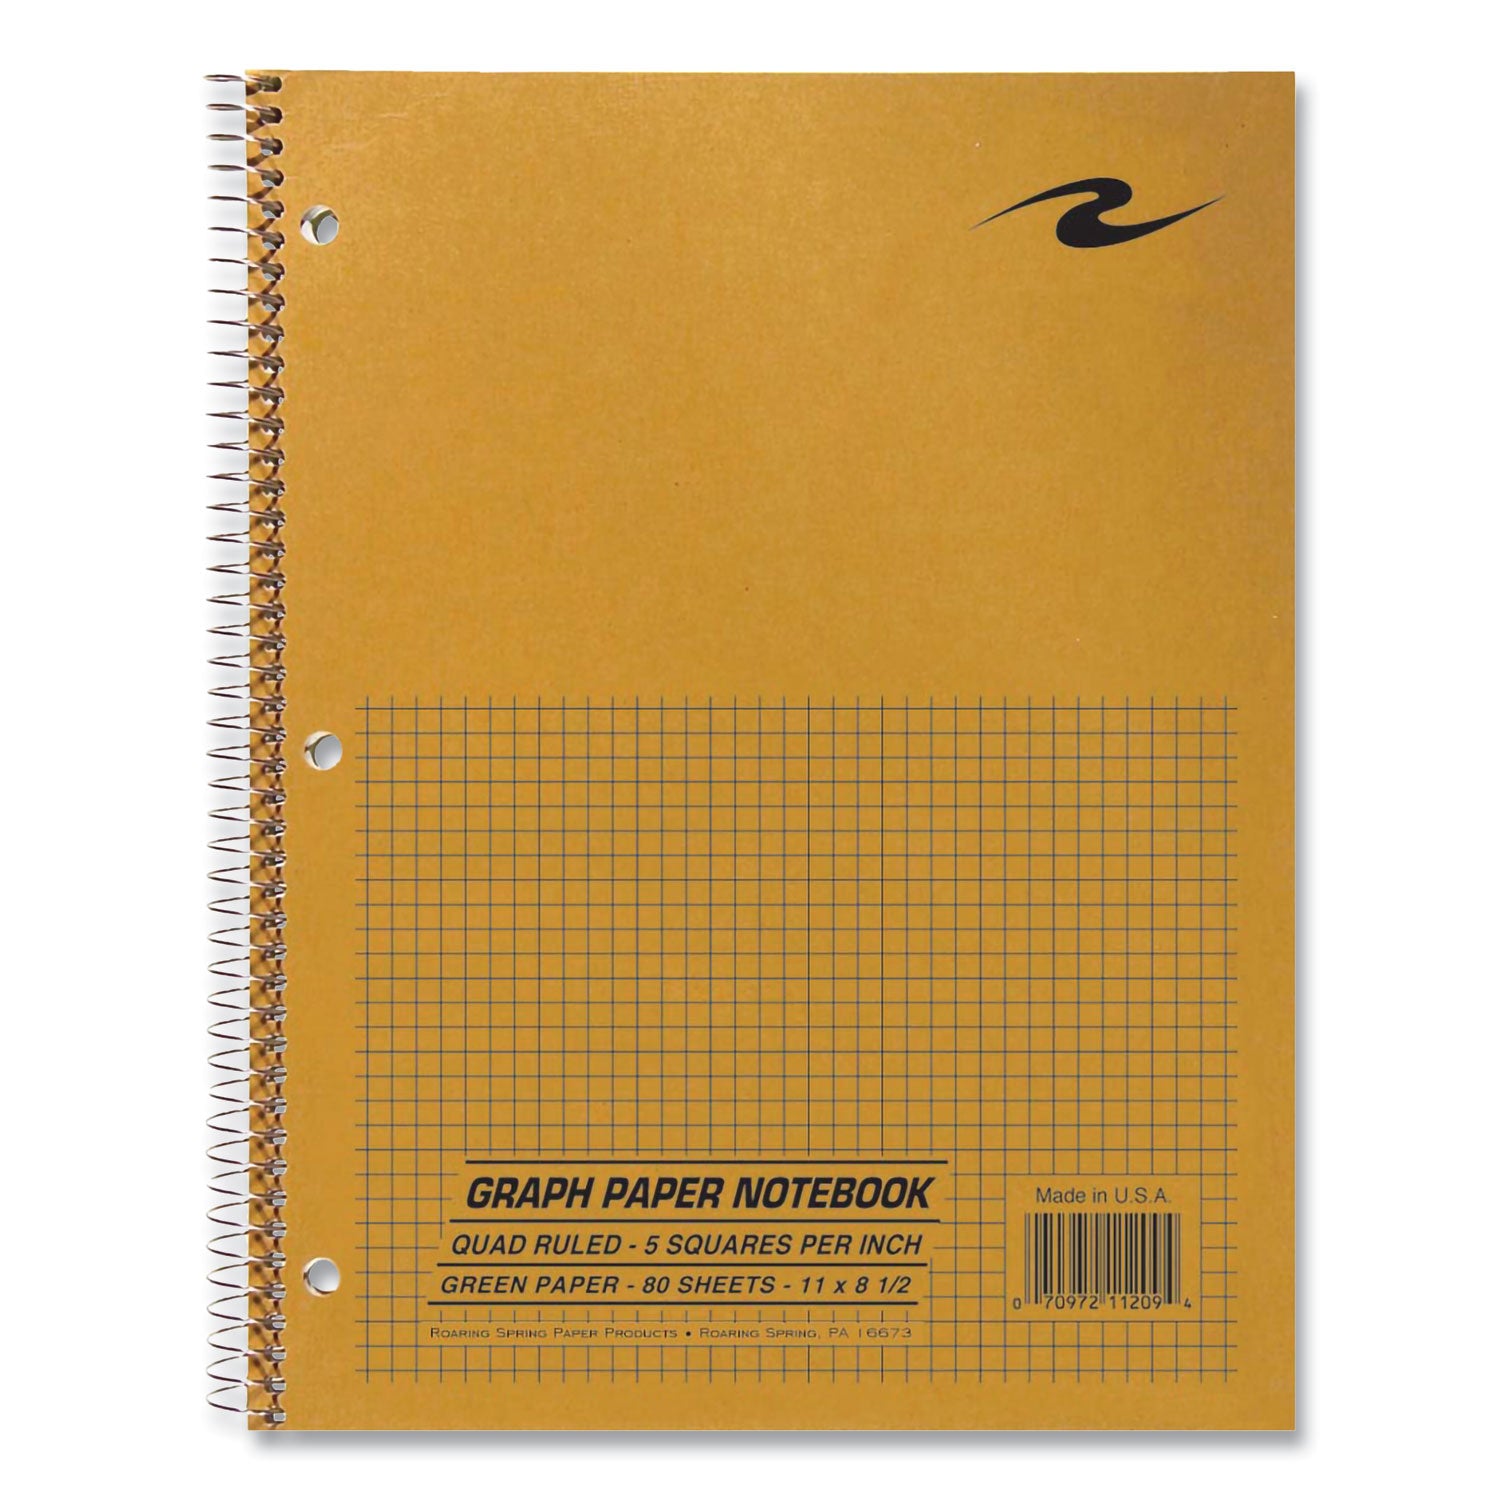 lab-and-science-wirebound-notebook-quadrille-rule-5-sq-in-brown-cover-80-85-x-11-sheets-24-ct-ships-in-4-6-bus-days_roa11209cs - 2